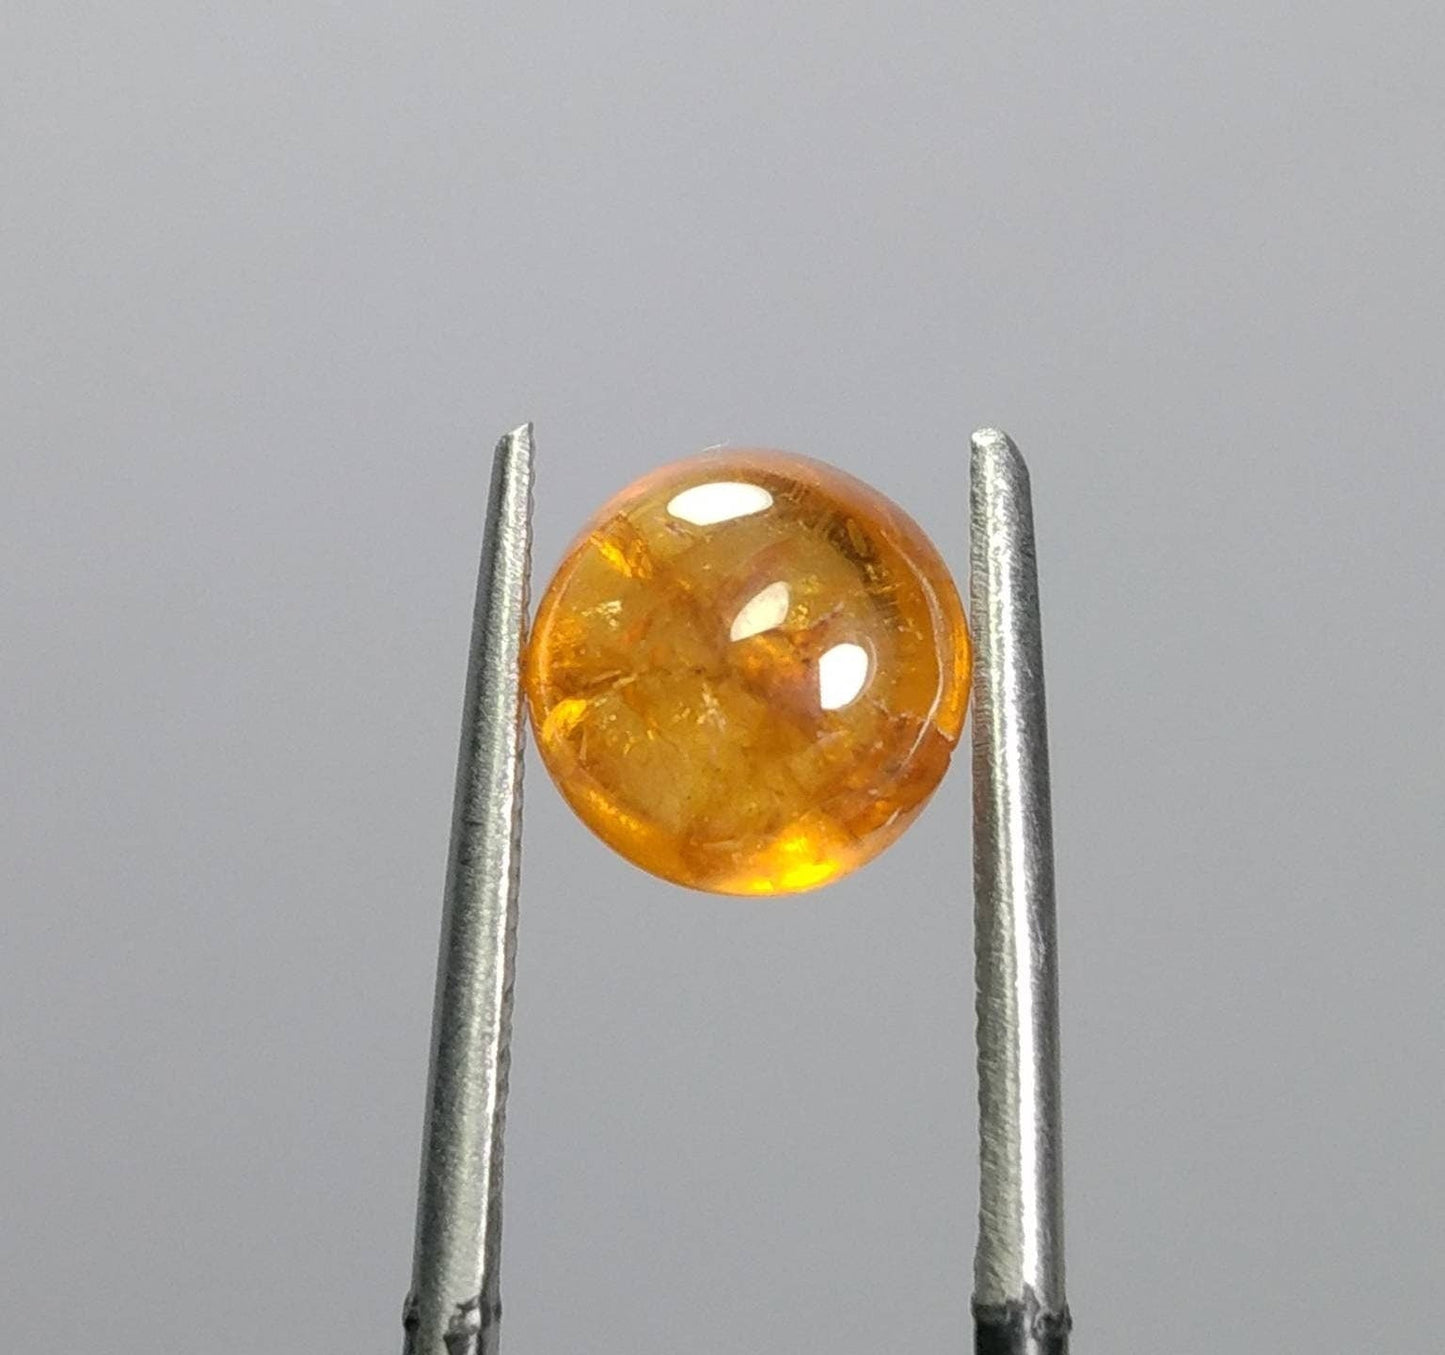 ARSAA GEMS AND MINERALSNatural fine quality beautiful 27.5 carats small lot of calibrated yellow Spessartine garnet cabochons - Premium  from ARSAA GEMS AND MINERALS - Just $55.00! Shop now at ARSAA GEMS AND MINERALS